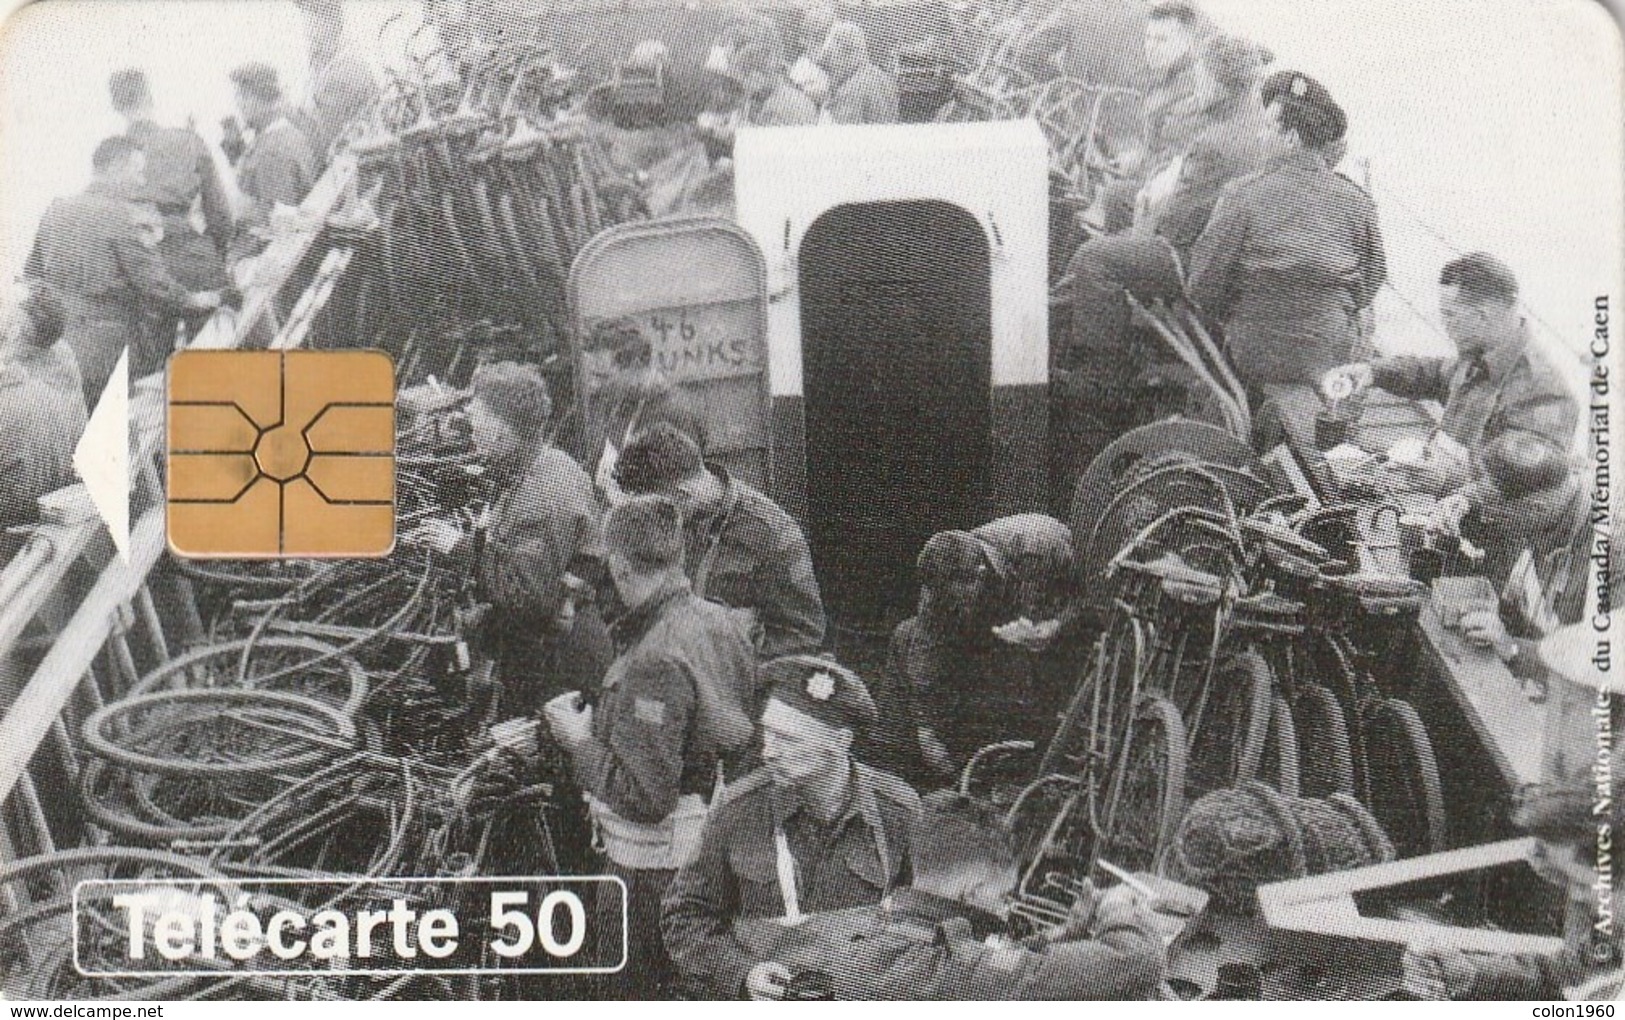 FRANCIA. 50th Anniversary Of Landings And The Liberation Of France. Debarquement Flotille. 0474. 06/94. (309). - Armee